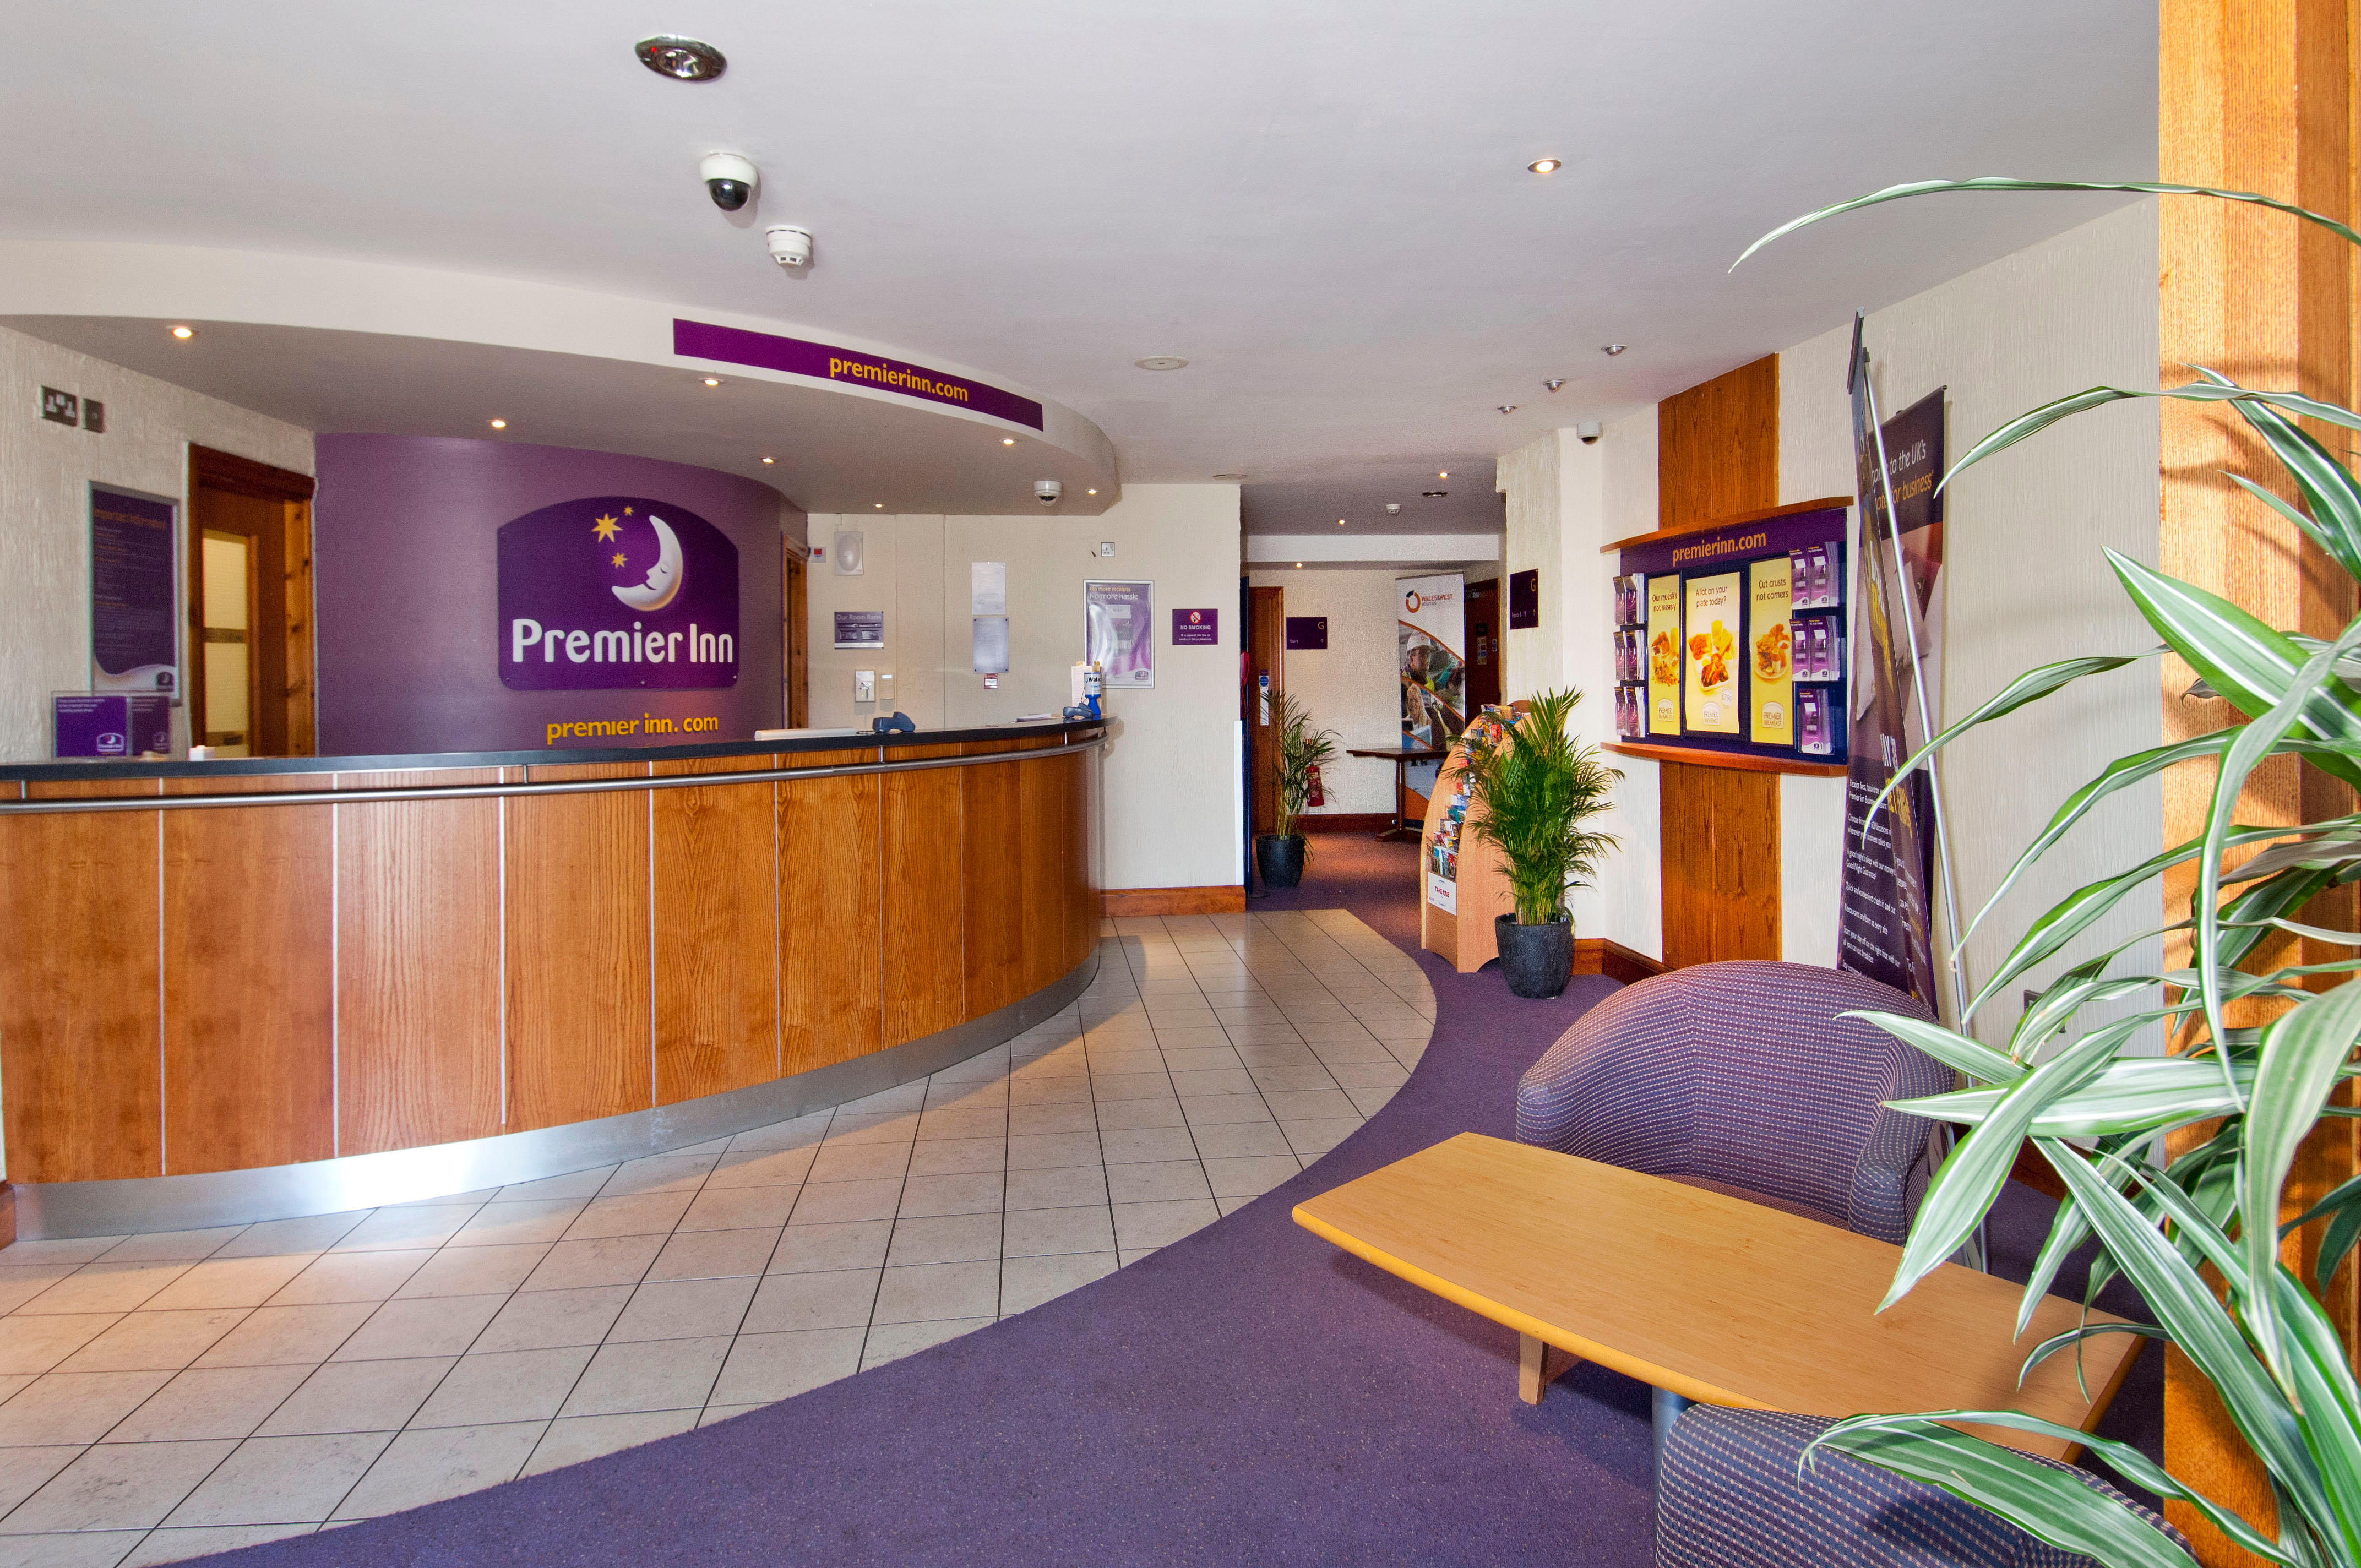 Premier Inn reception with check in desk Premier Inn Plymouth City Centre (Sutton Harbour) hotel Plymouth 03333 211393